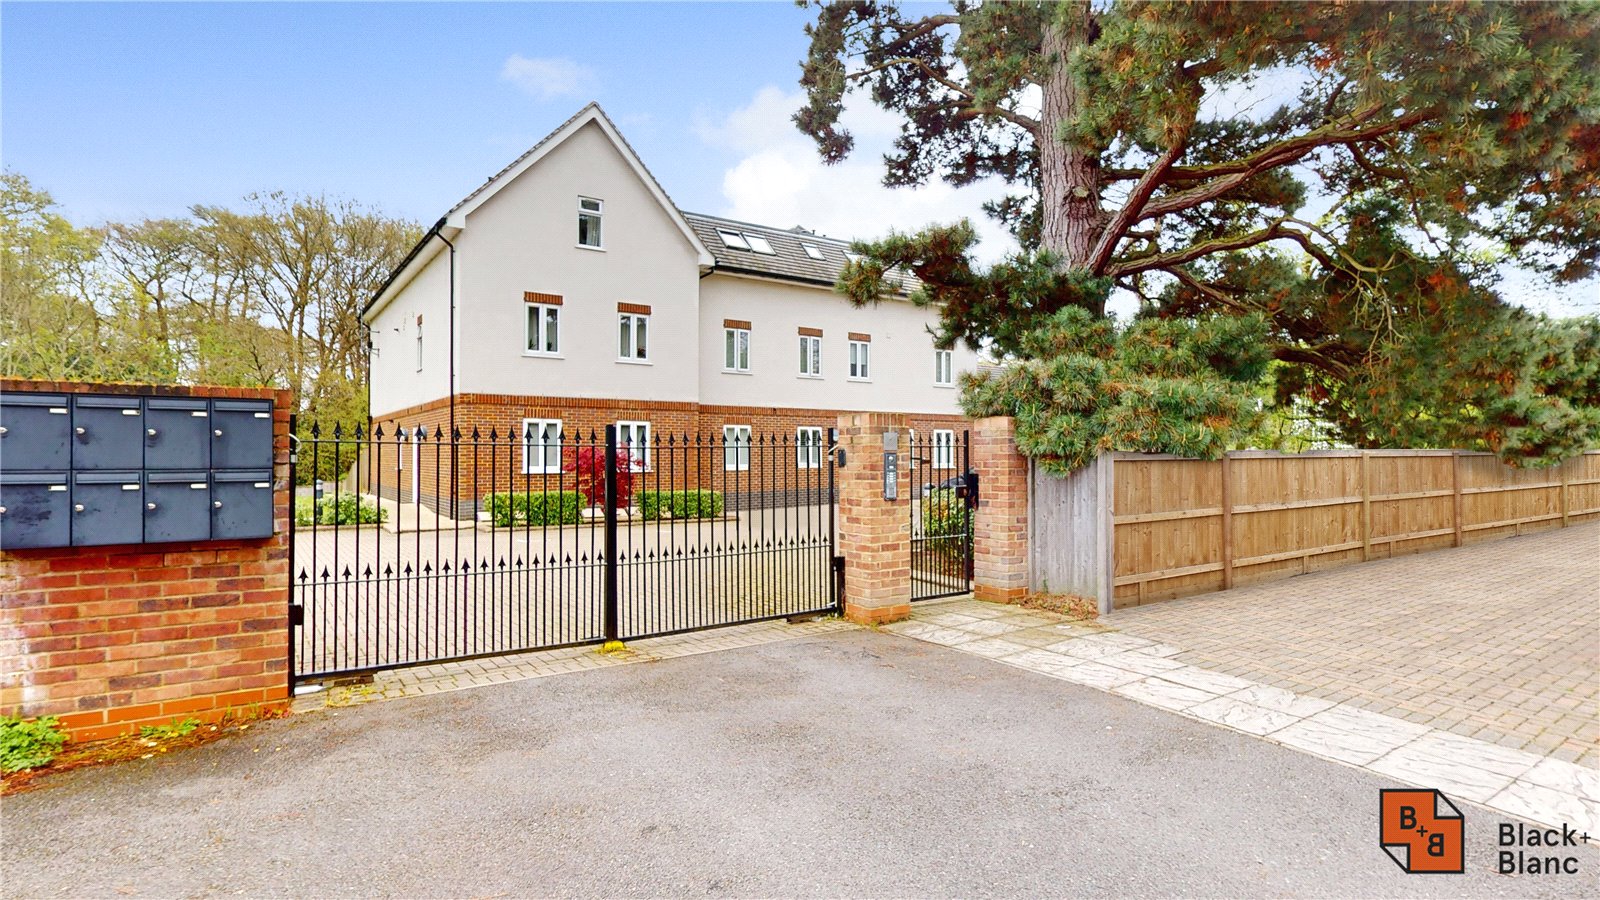 2 bed apartment for sale in Chancellors Close, Beckenham - Property Image 1